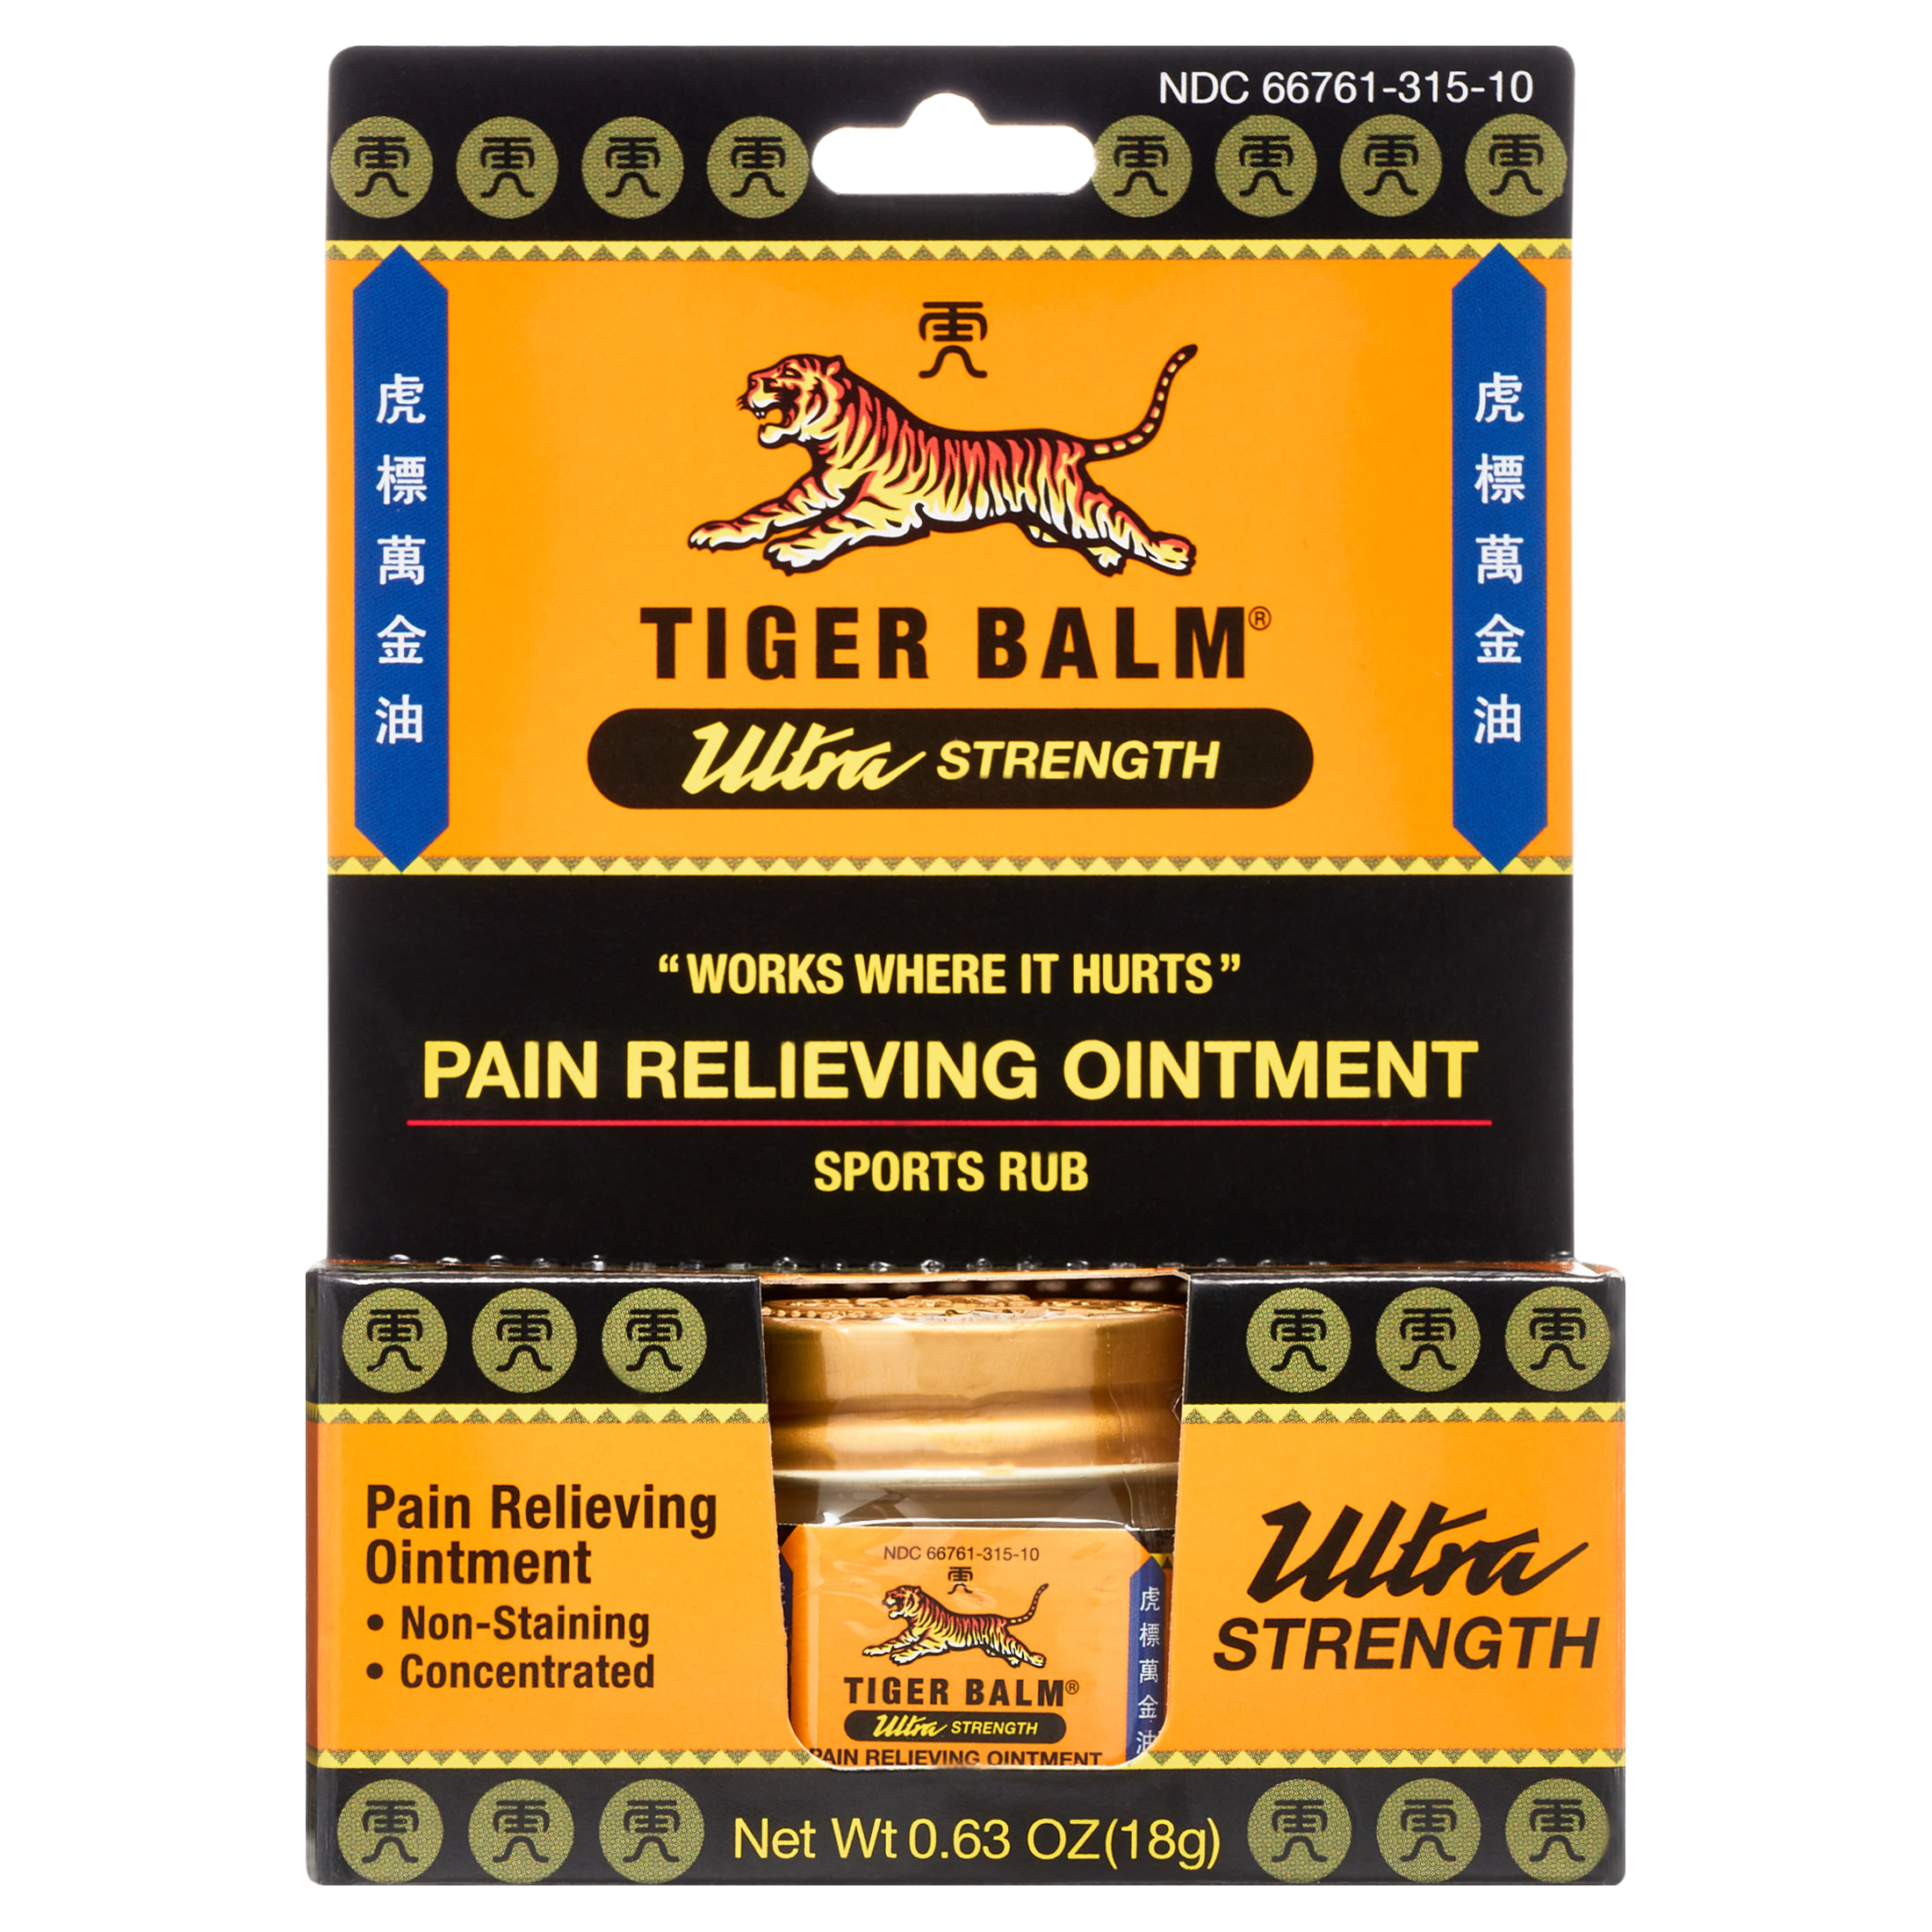 Tiger Balm Ultra Strength Pain Relieving Ointment, 0.63 oz Jar for Backaches Sore Muscles Bruises and Sprains - image 1 of 10